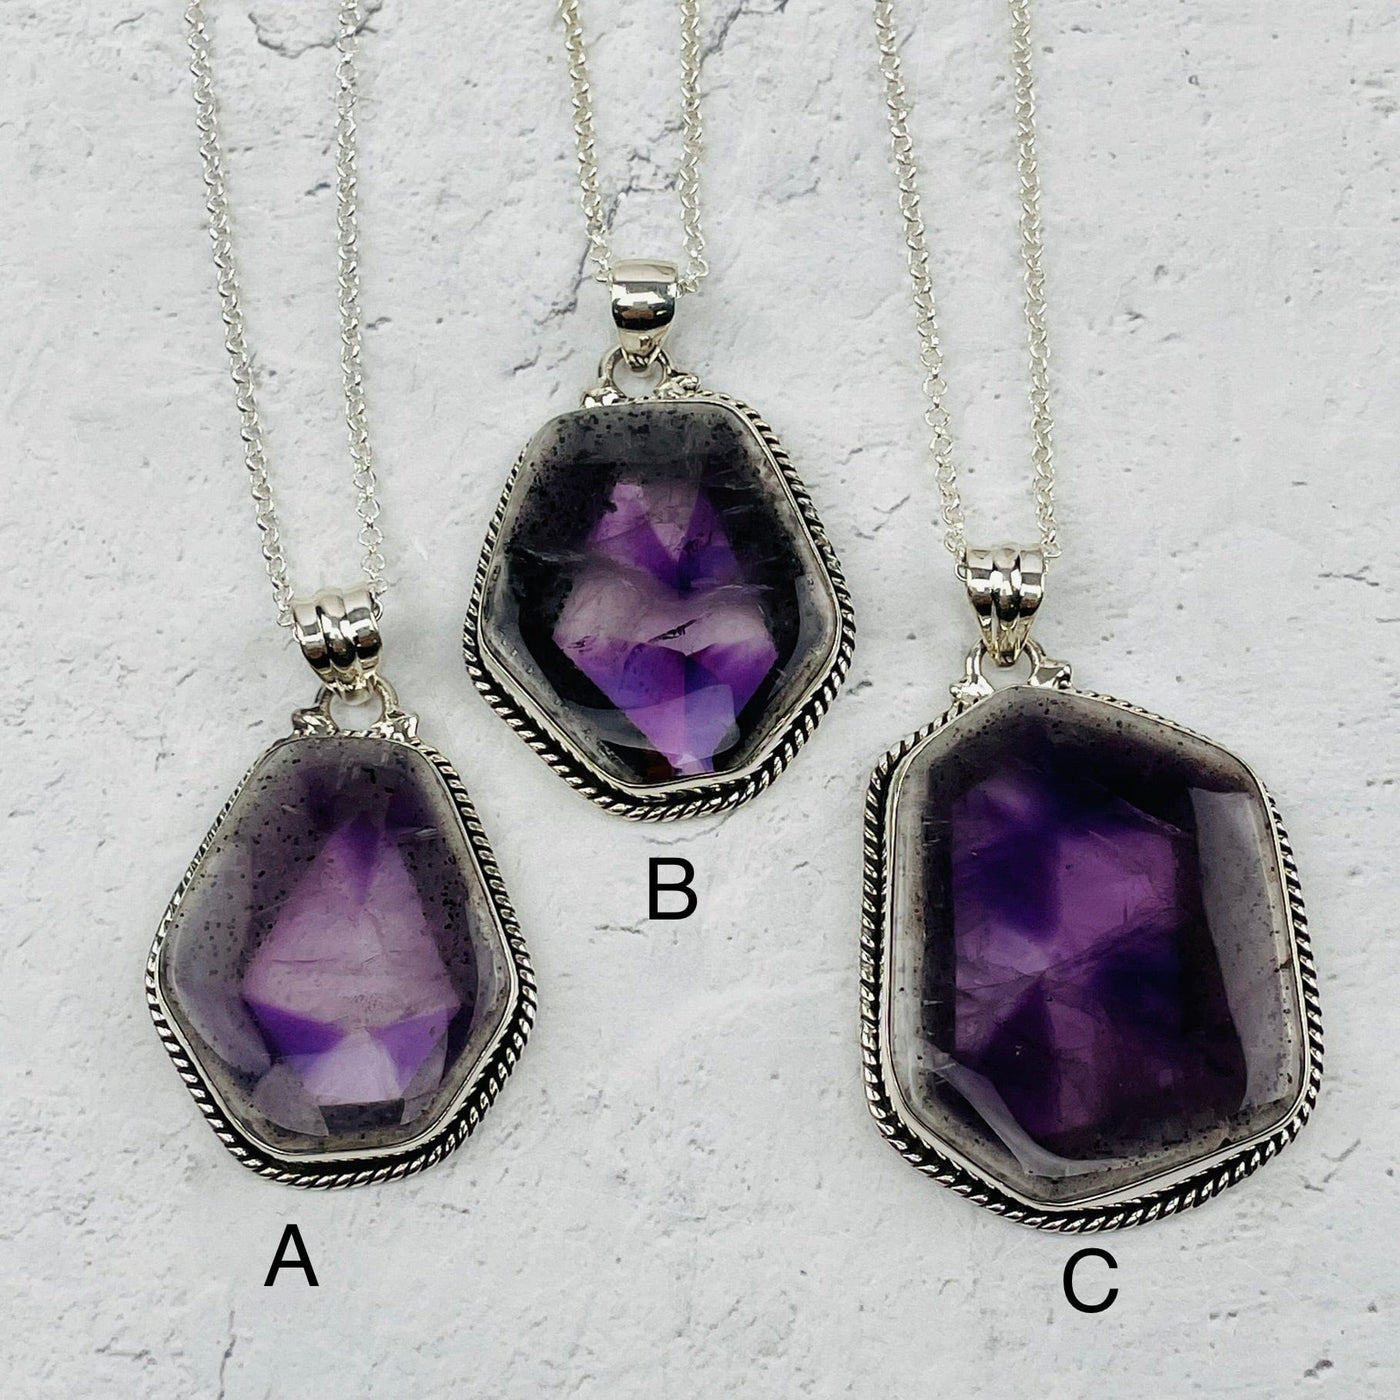 you select your favorite necklace 